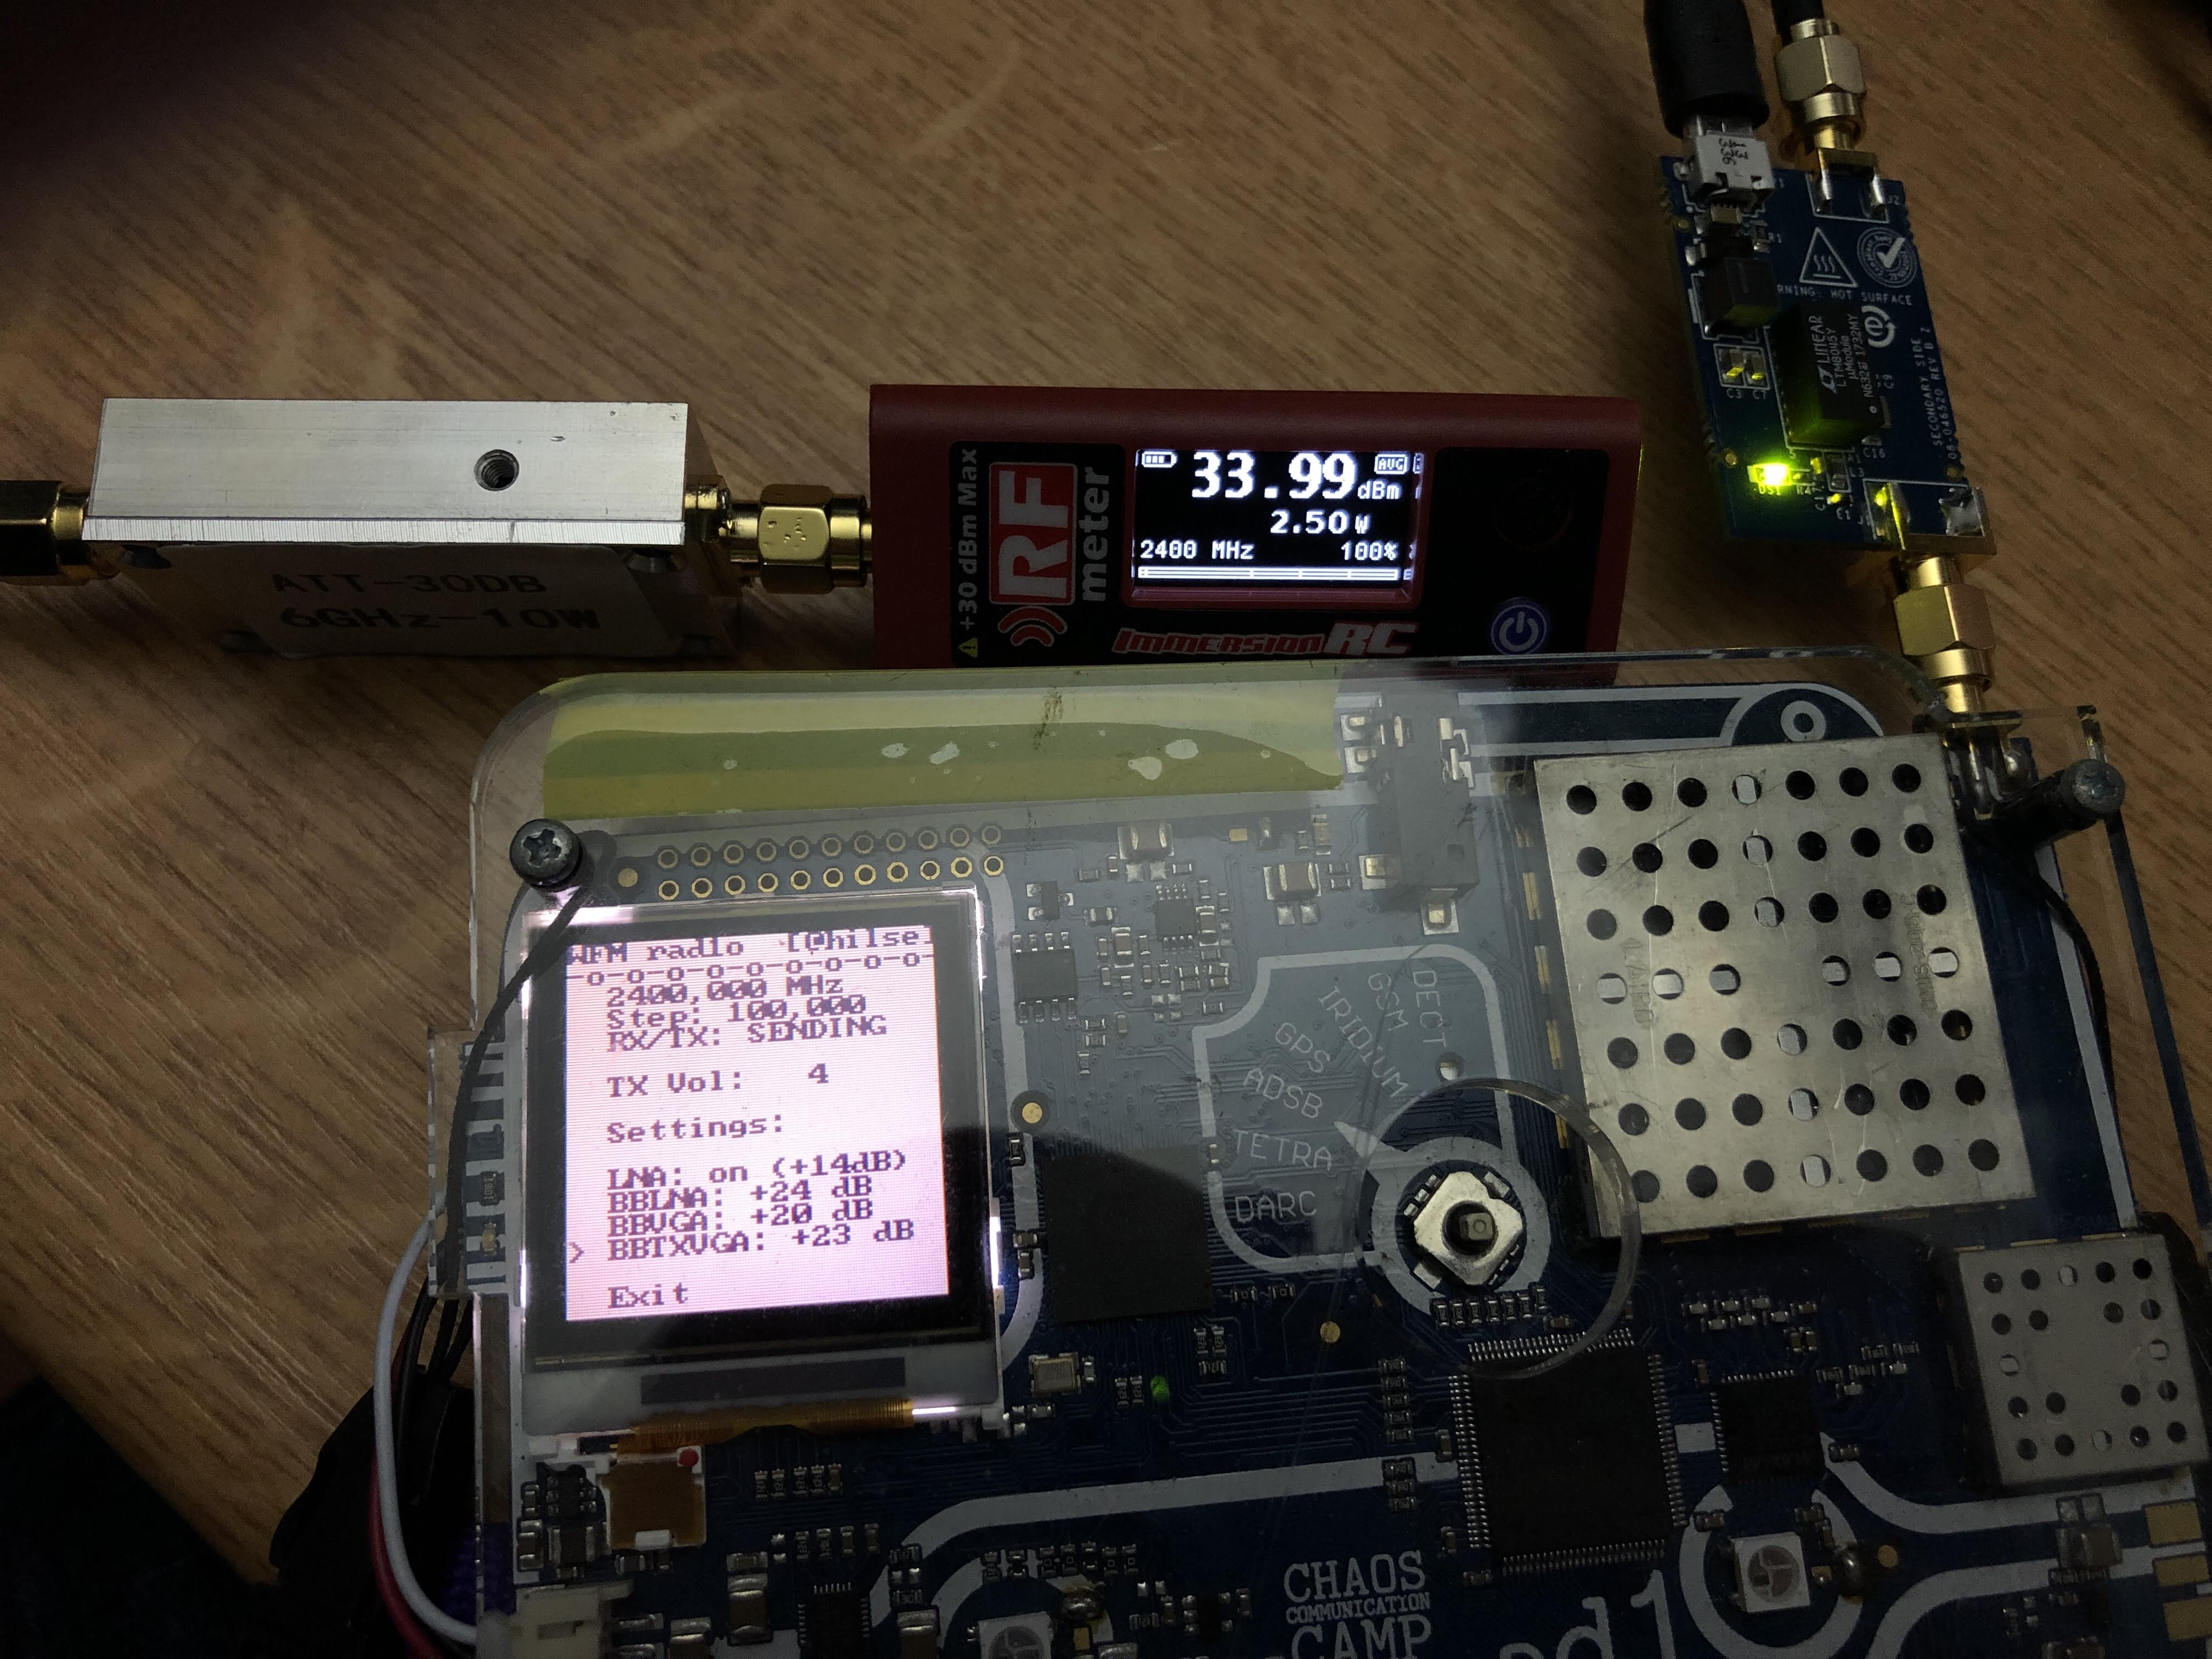 rad1o providing a test signal, power meter (connected to an attenuator) showing 33.99 dBm, 2.50W